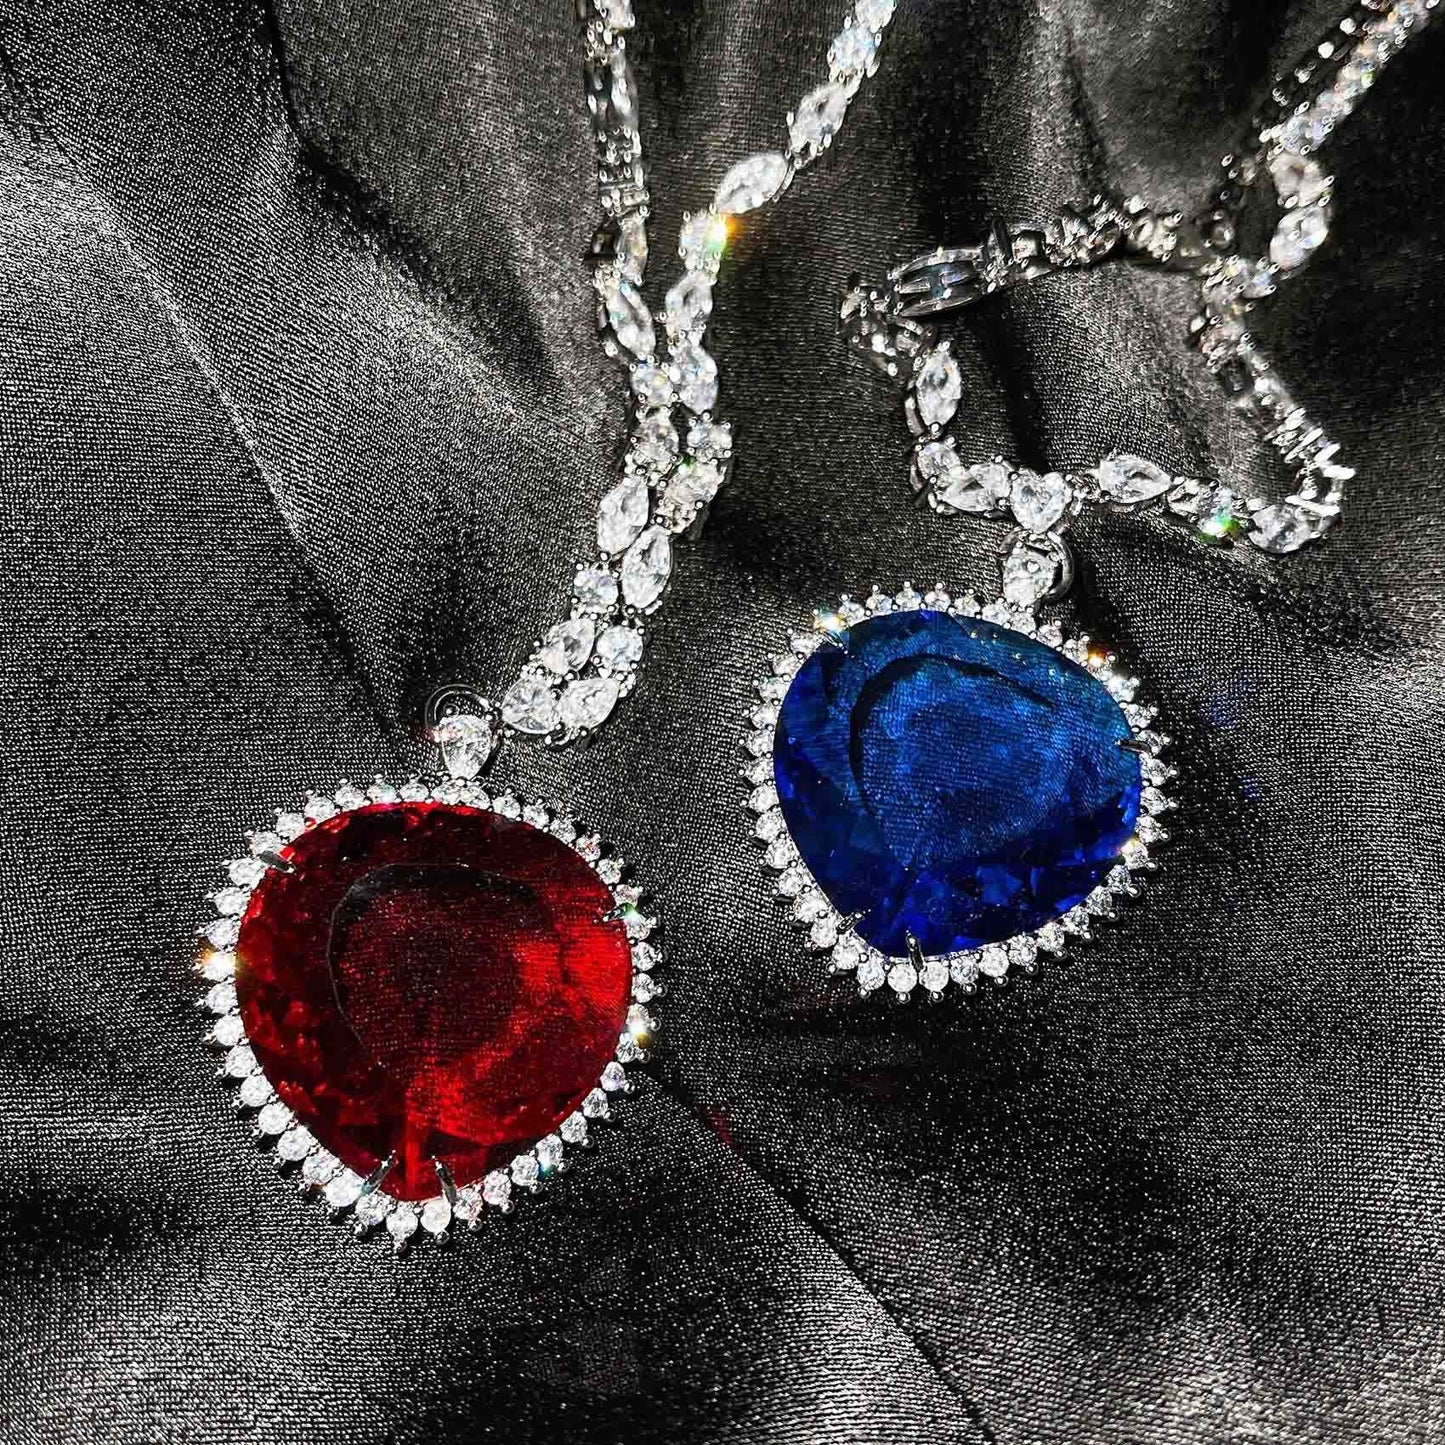 Blue Red TITANIC Heart of the Ocean Necklaces Crystal Chain Pendant Necklace